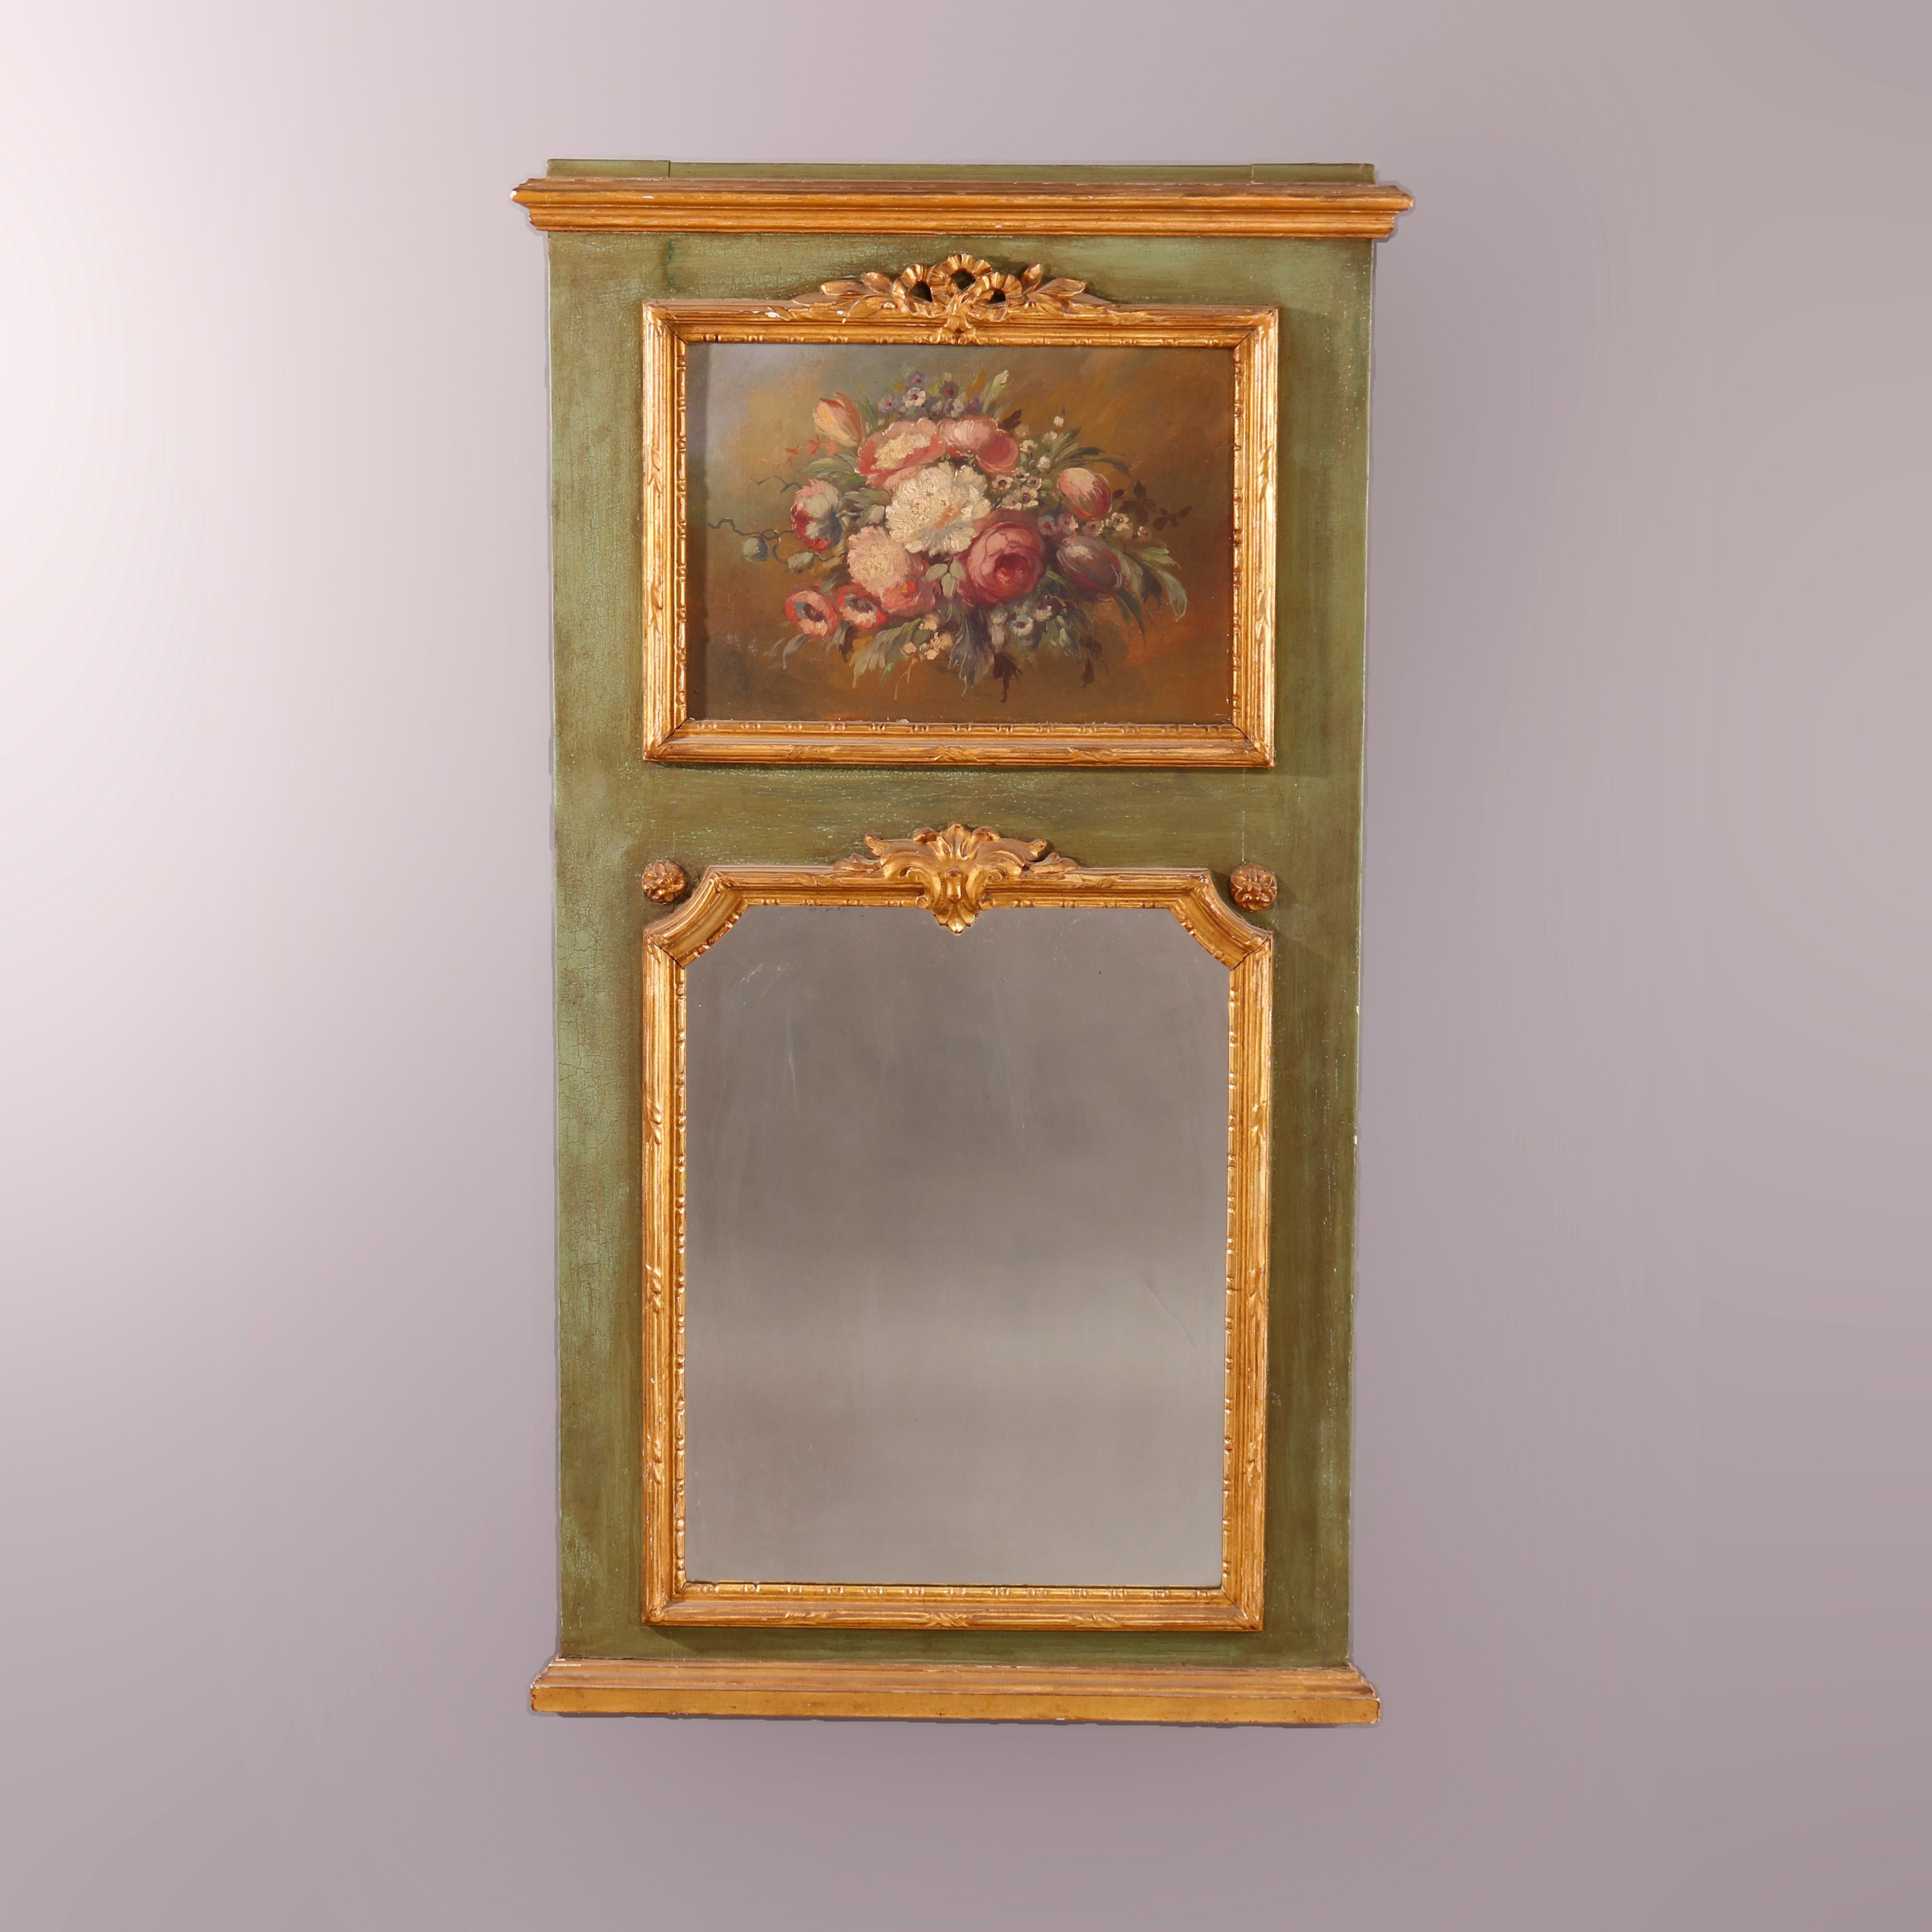 An oversized French Trumeau mirror offers green painted frame with gilt highlights and hand painted floral reserve over lower mirror, 18th C.

Measures - 46'' H x 27'' W x 2.25'' D.

Catalogue Note: Ask about DISCOUNTED DELIVERY RATES available to